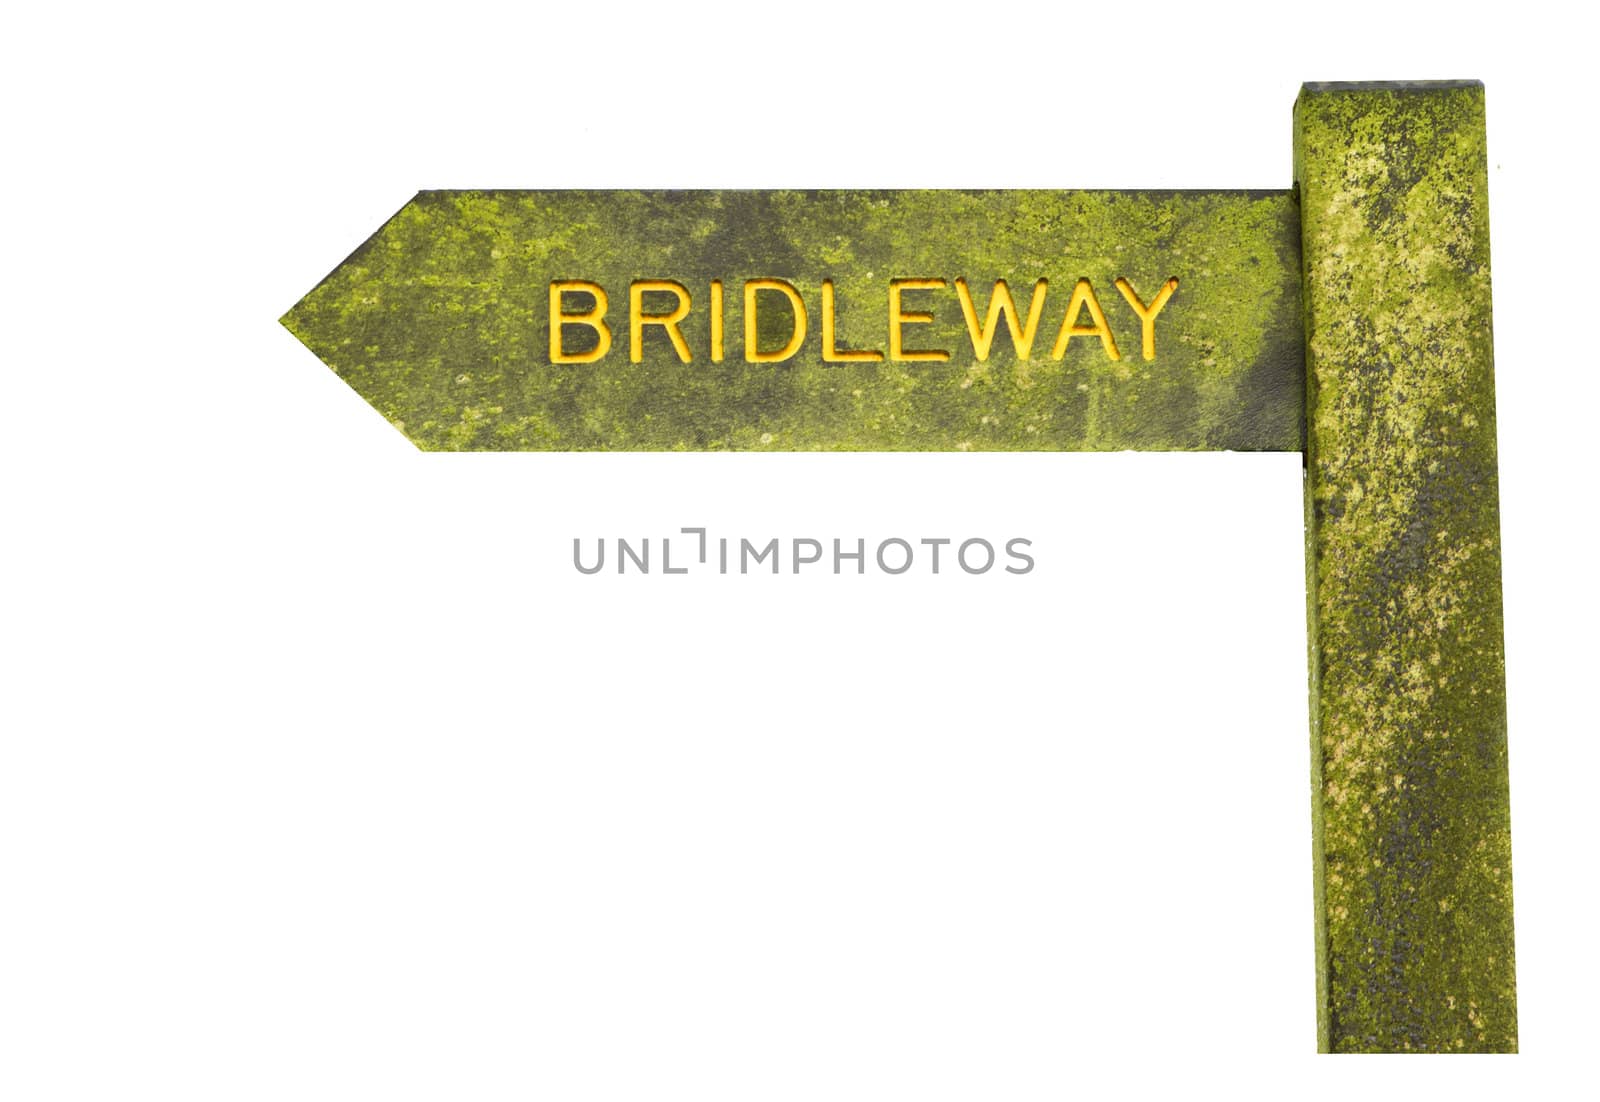 bridleway sign isolated by smikeymikey1